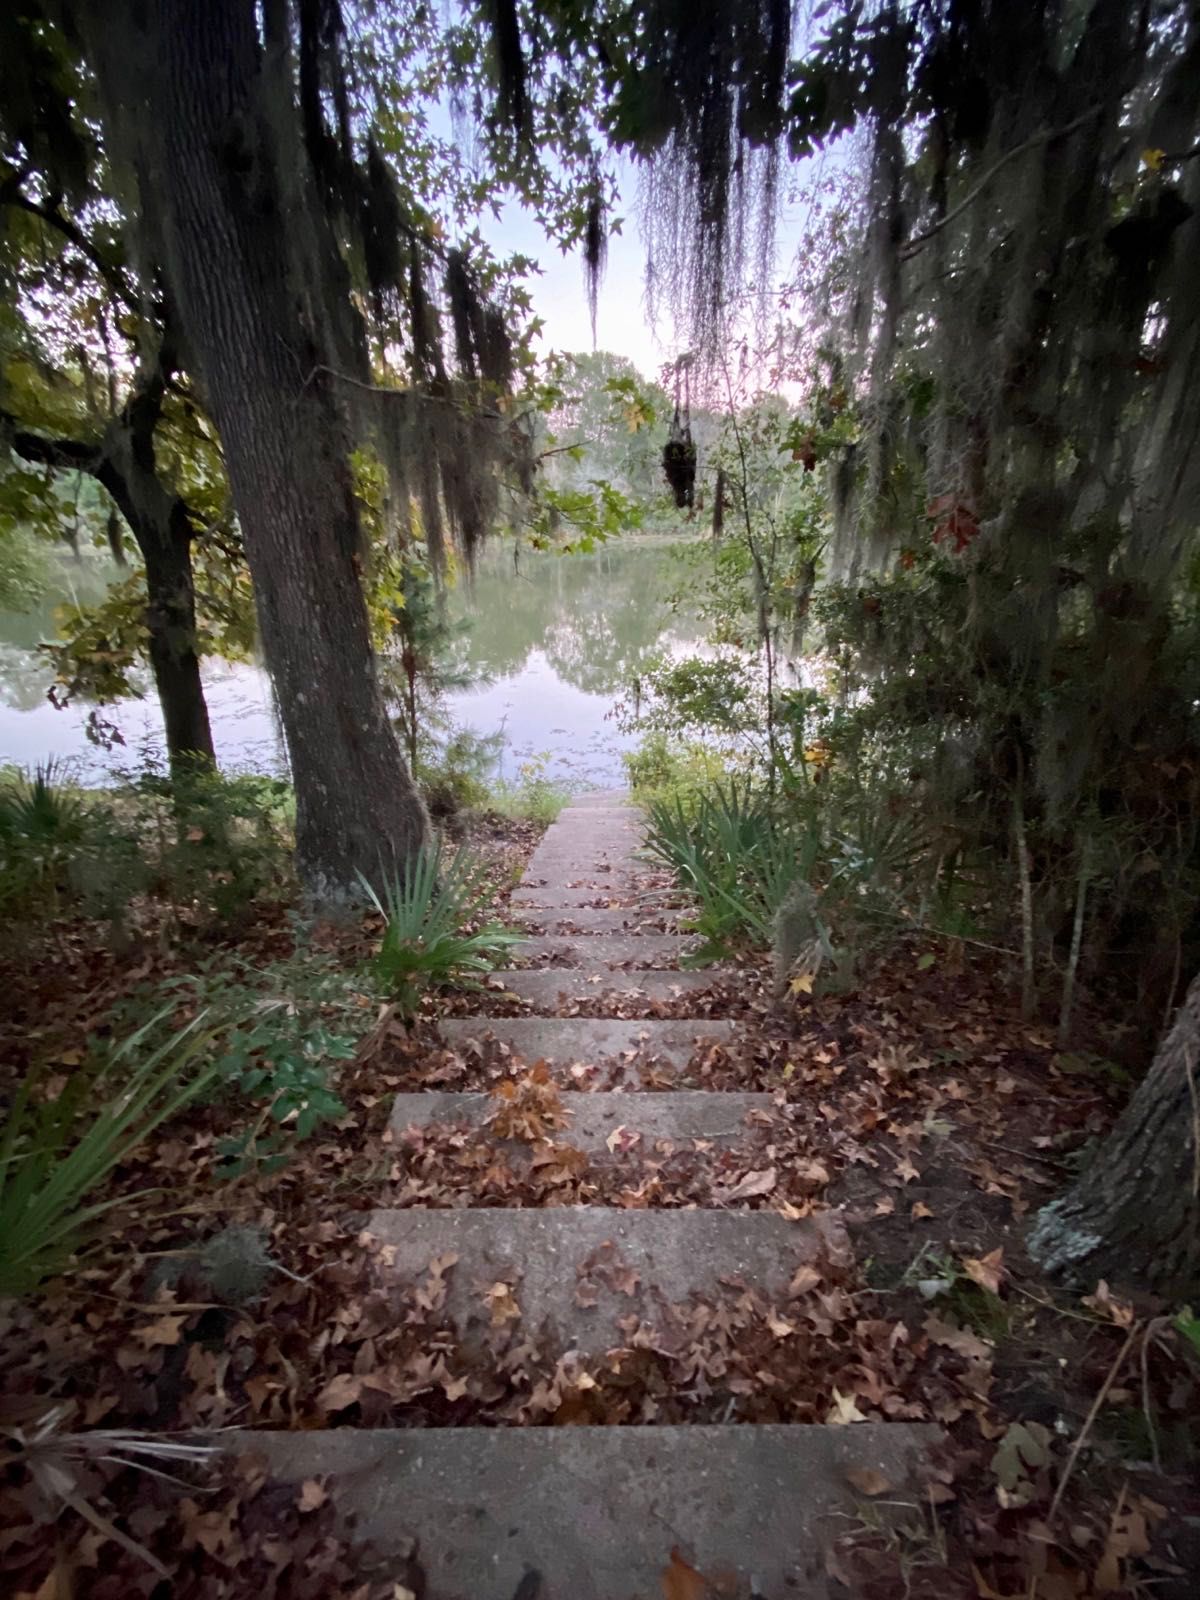 Stairway to heaven? Stubblefield Lake in Sam Houston National Forest